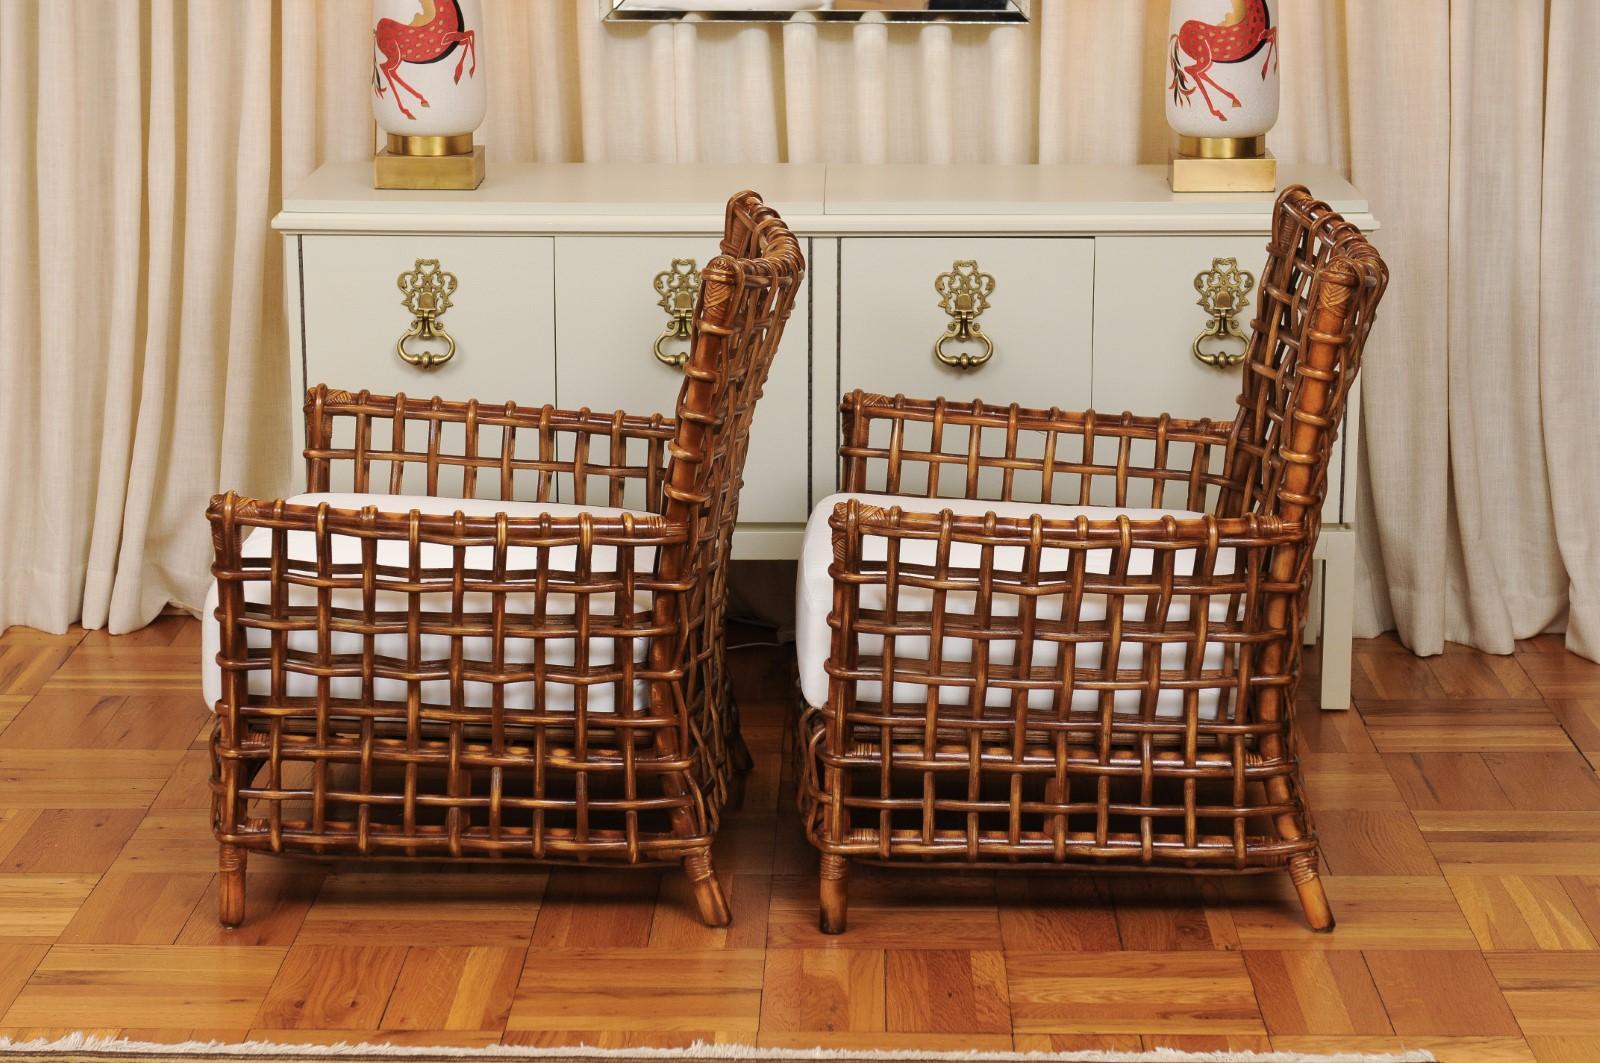 Fabulous Pair of Caramel Rattan and Cane Club Chairs - 2 Pair Available For Sale 1